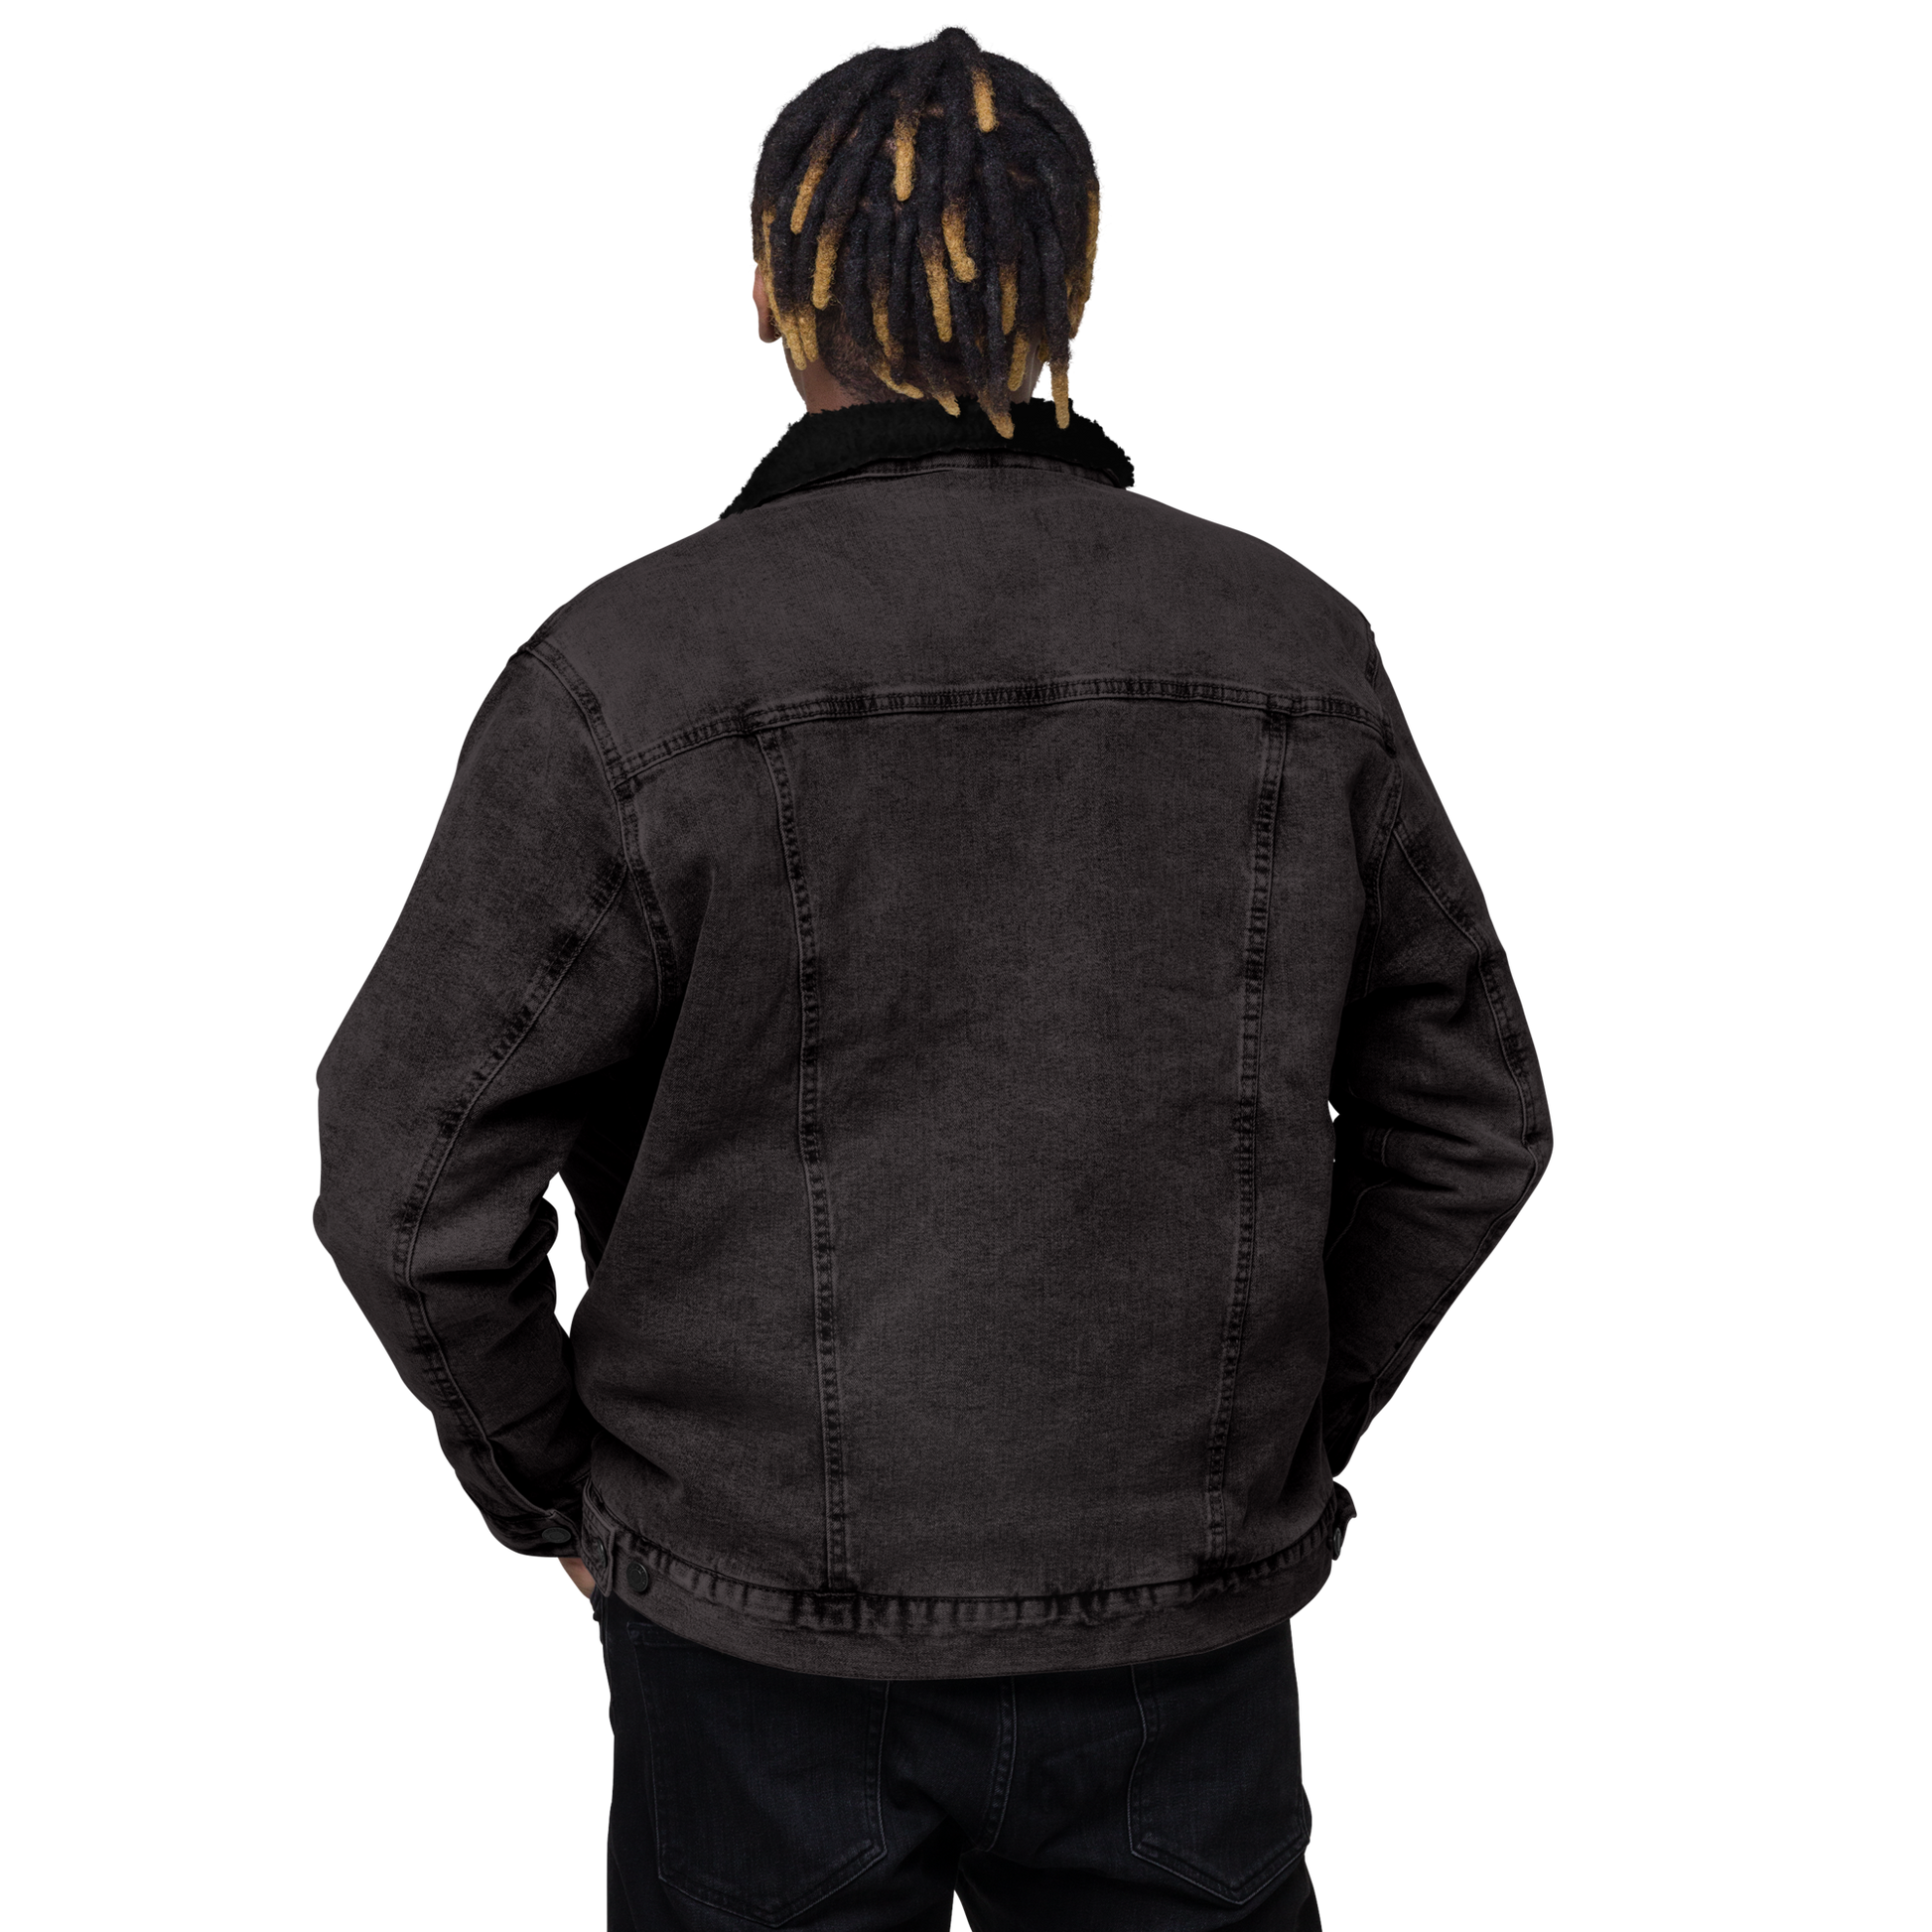 YHM Designs - YOW Ottawa Denim Sherpa Jacket - Crossed-X Design with Airport Code and Vintage Propliner - Black & White Embroidery - Image 09